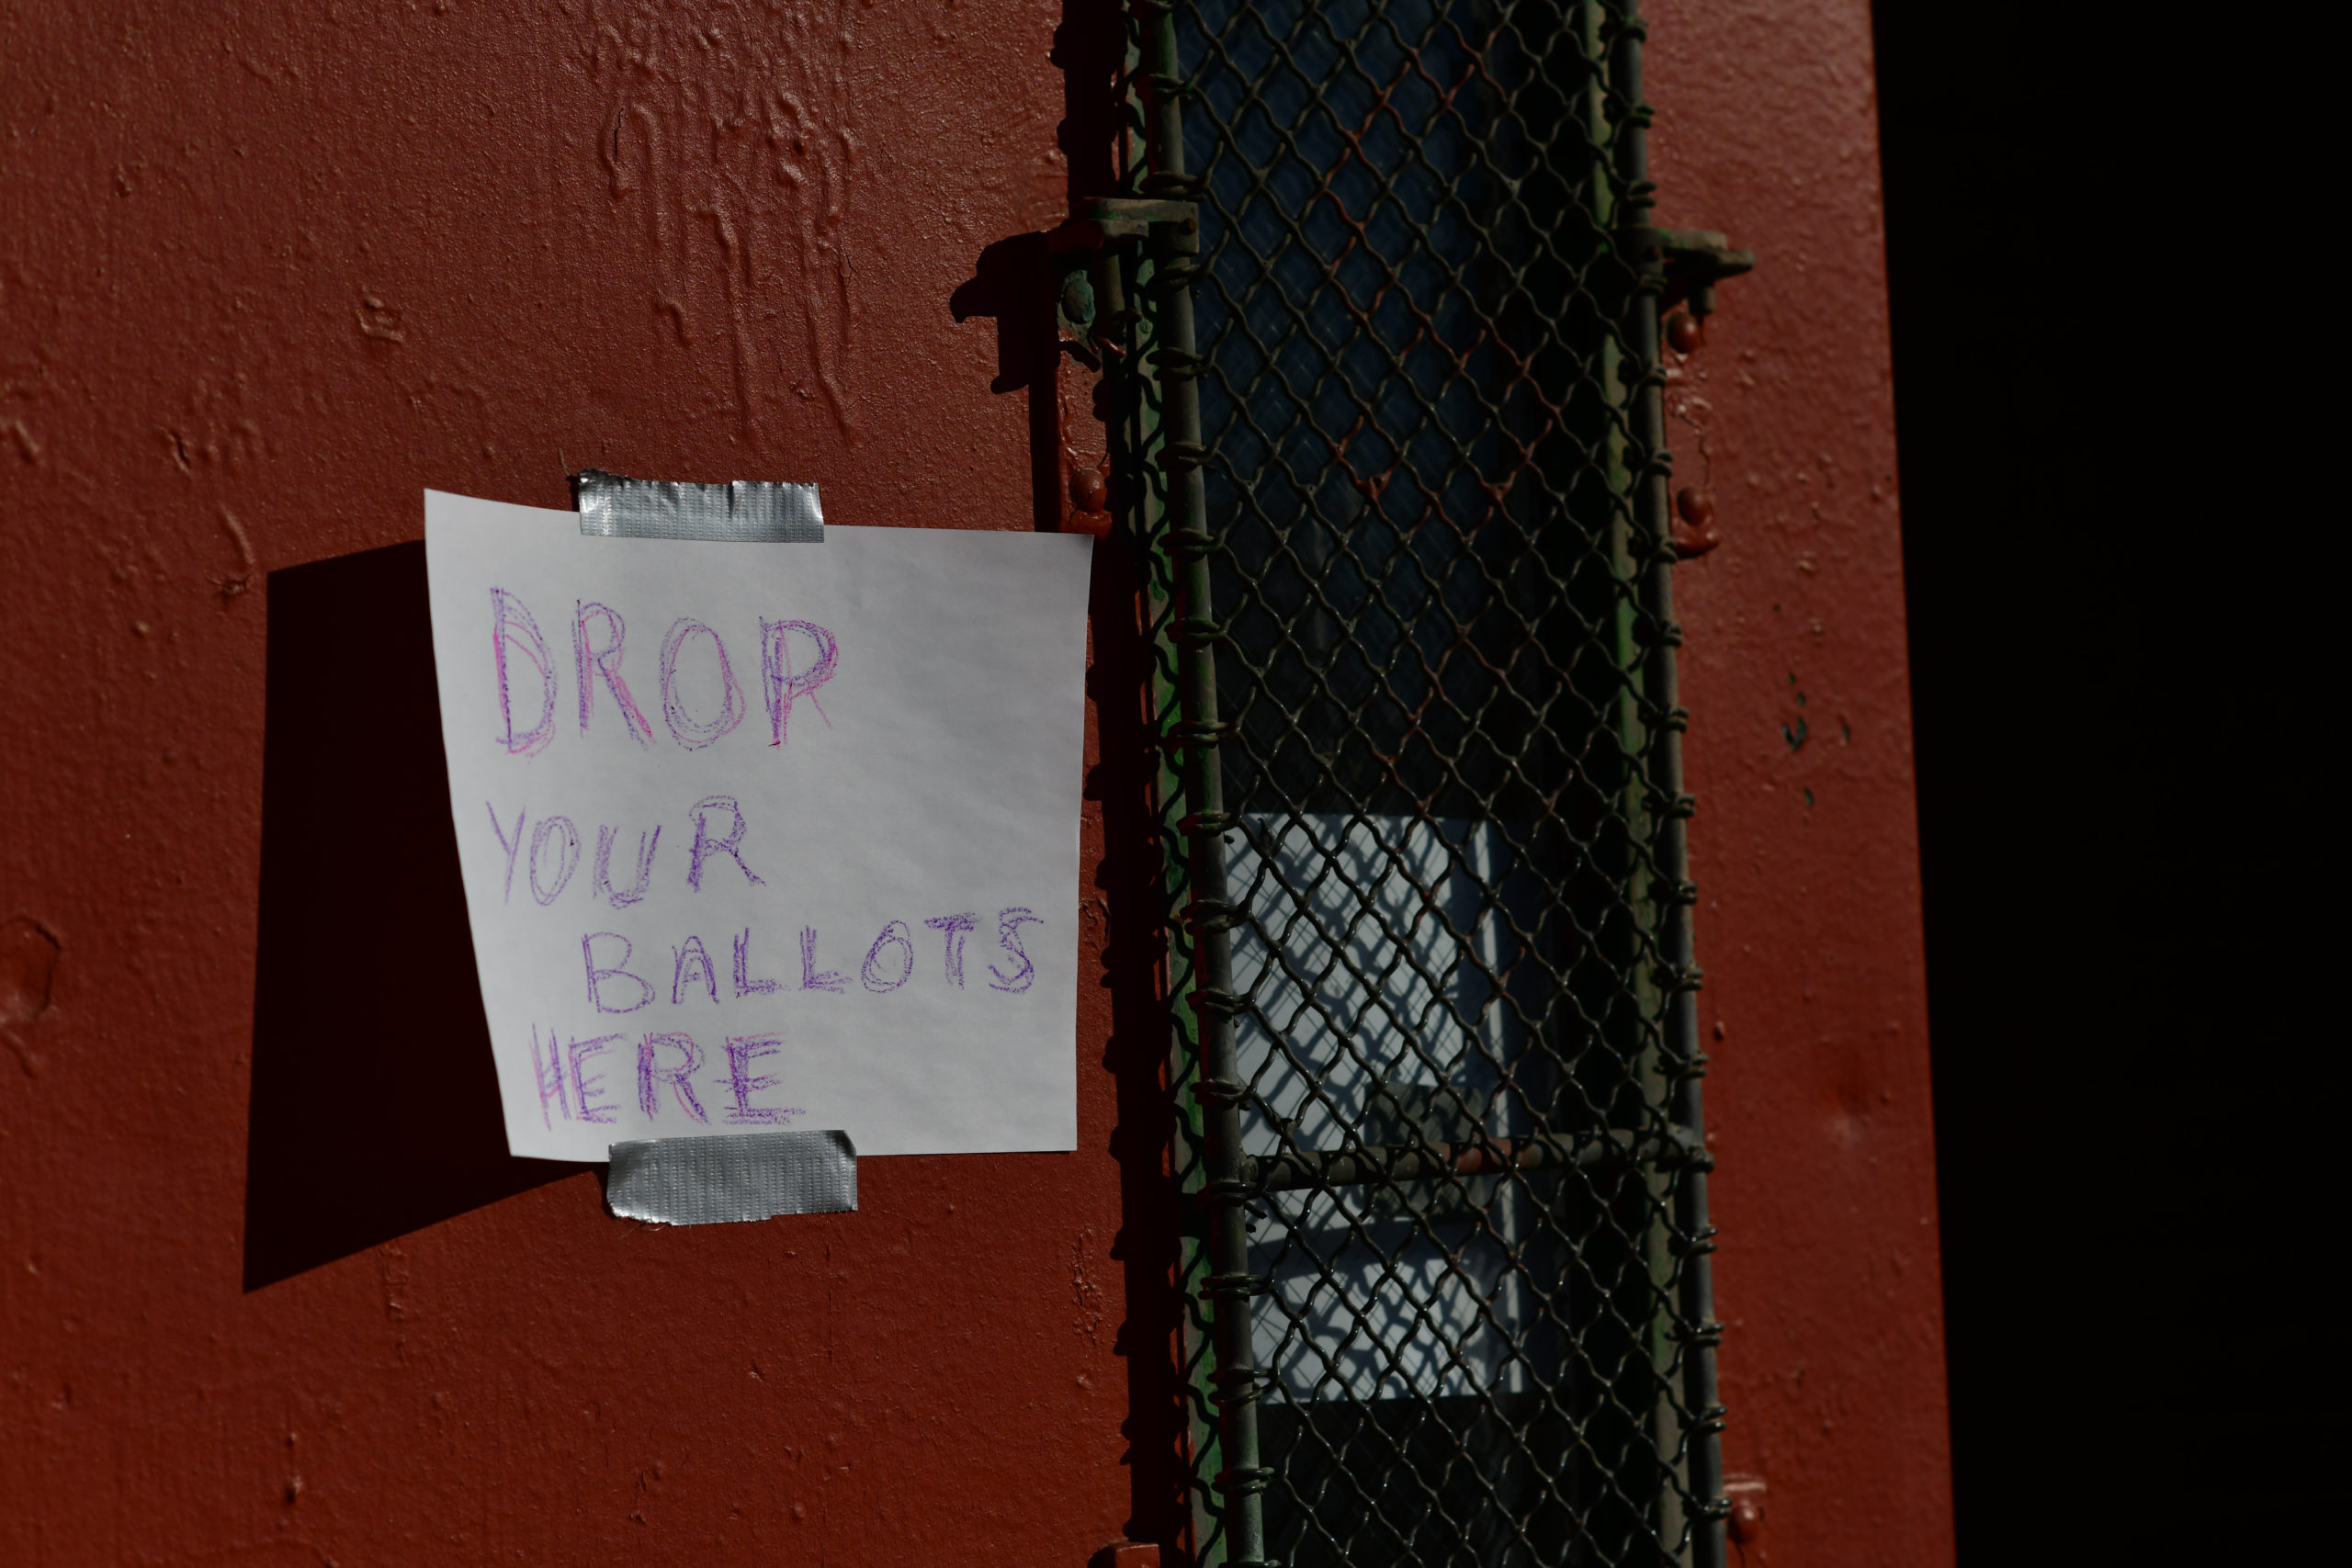 PHILADELPHIA, PA - OCTOBER 17: A sign directs voters to cast their early voting ballots at a satellite polling location on October 17, 2020 in Philadelphia, Pennsylvania. With the election only a little more than two weeks away, a new form of in-person early voting by using mail ballots, has enabled millions of voters to cast their ballots. President Donald Trump won the battleground state of Pennsylvania by only 44,000 votes in 2016, the first Republican to do so since President George Bush in 1988. (Photo by Mark Makela/Getty Images)